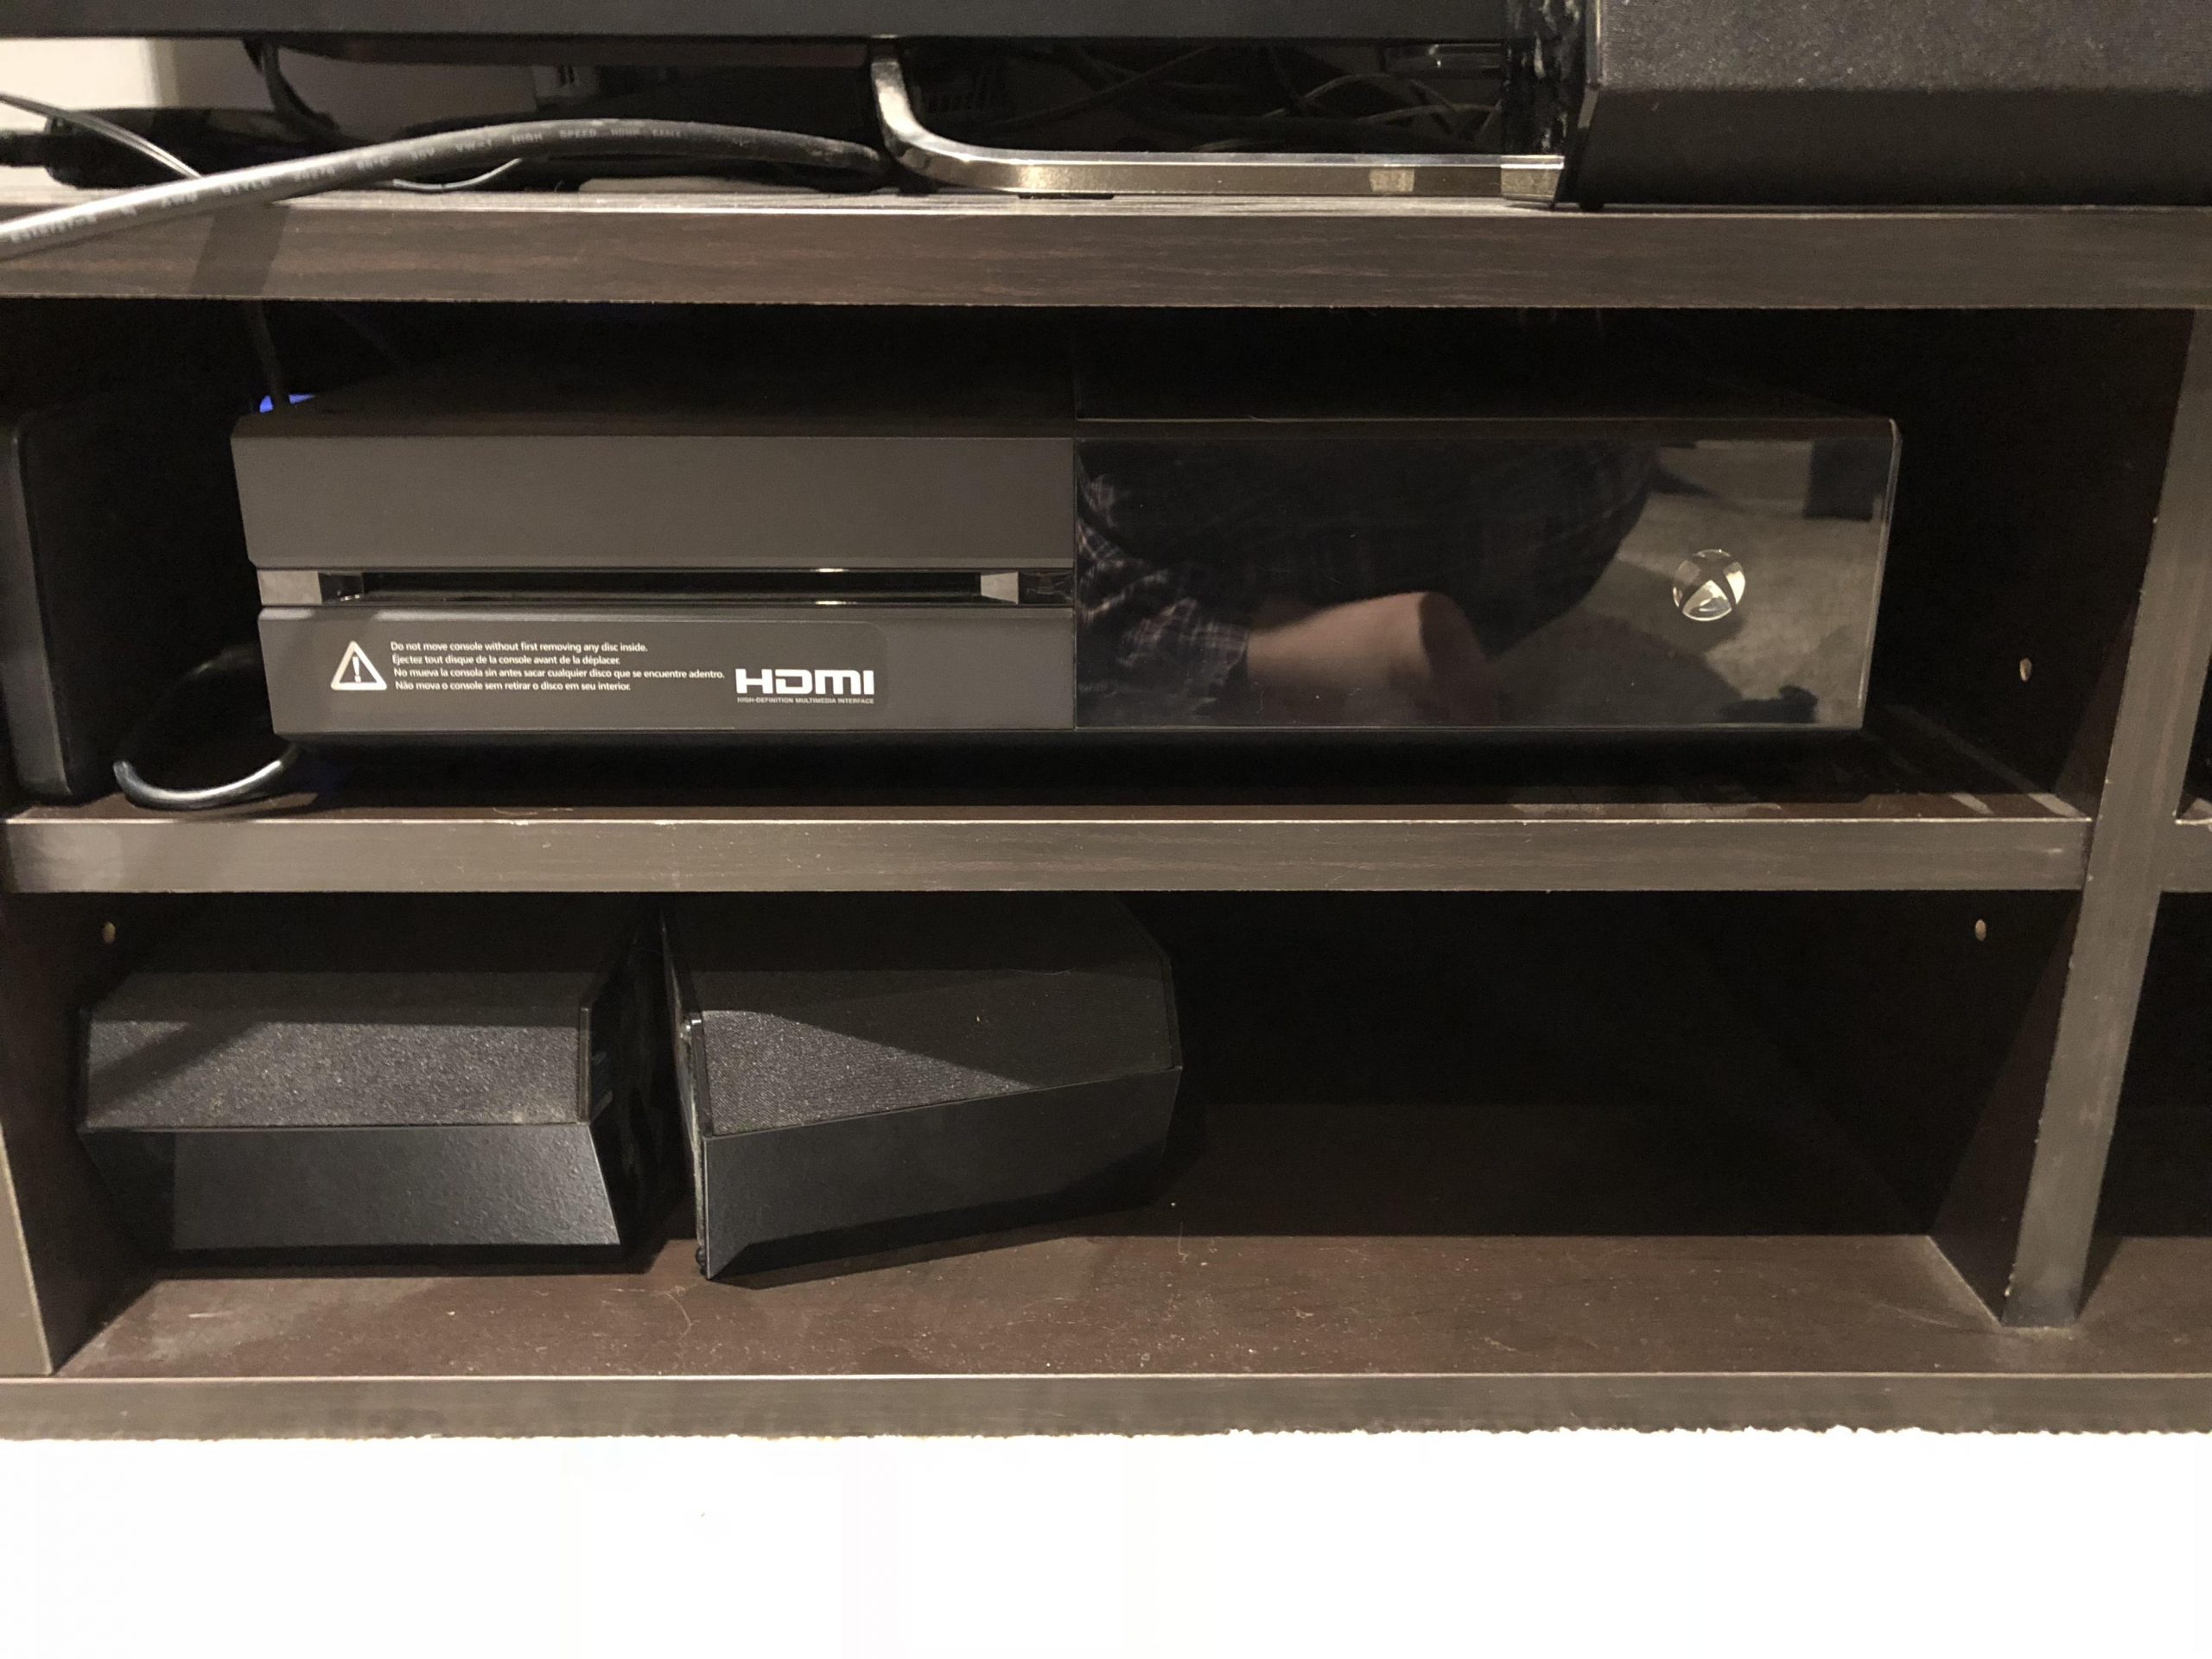 Is This Enough Room On The Top For Ventilation Xboxone within proportions 4032 X 3024